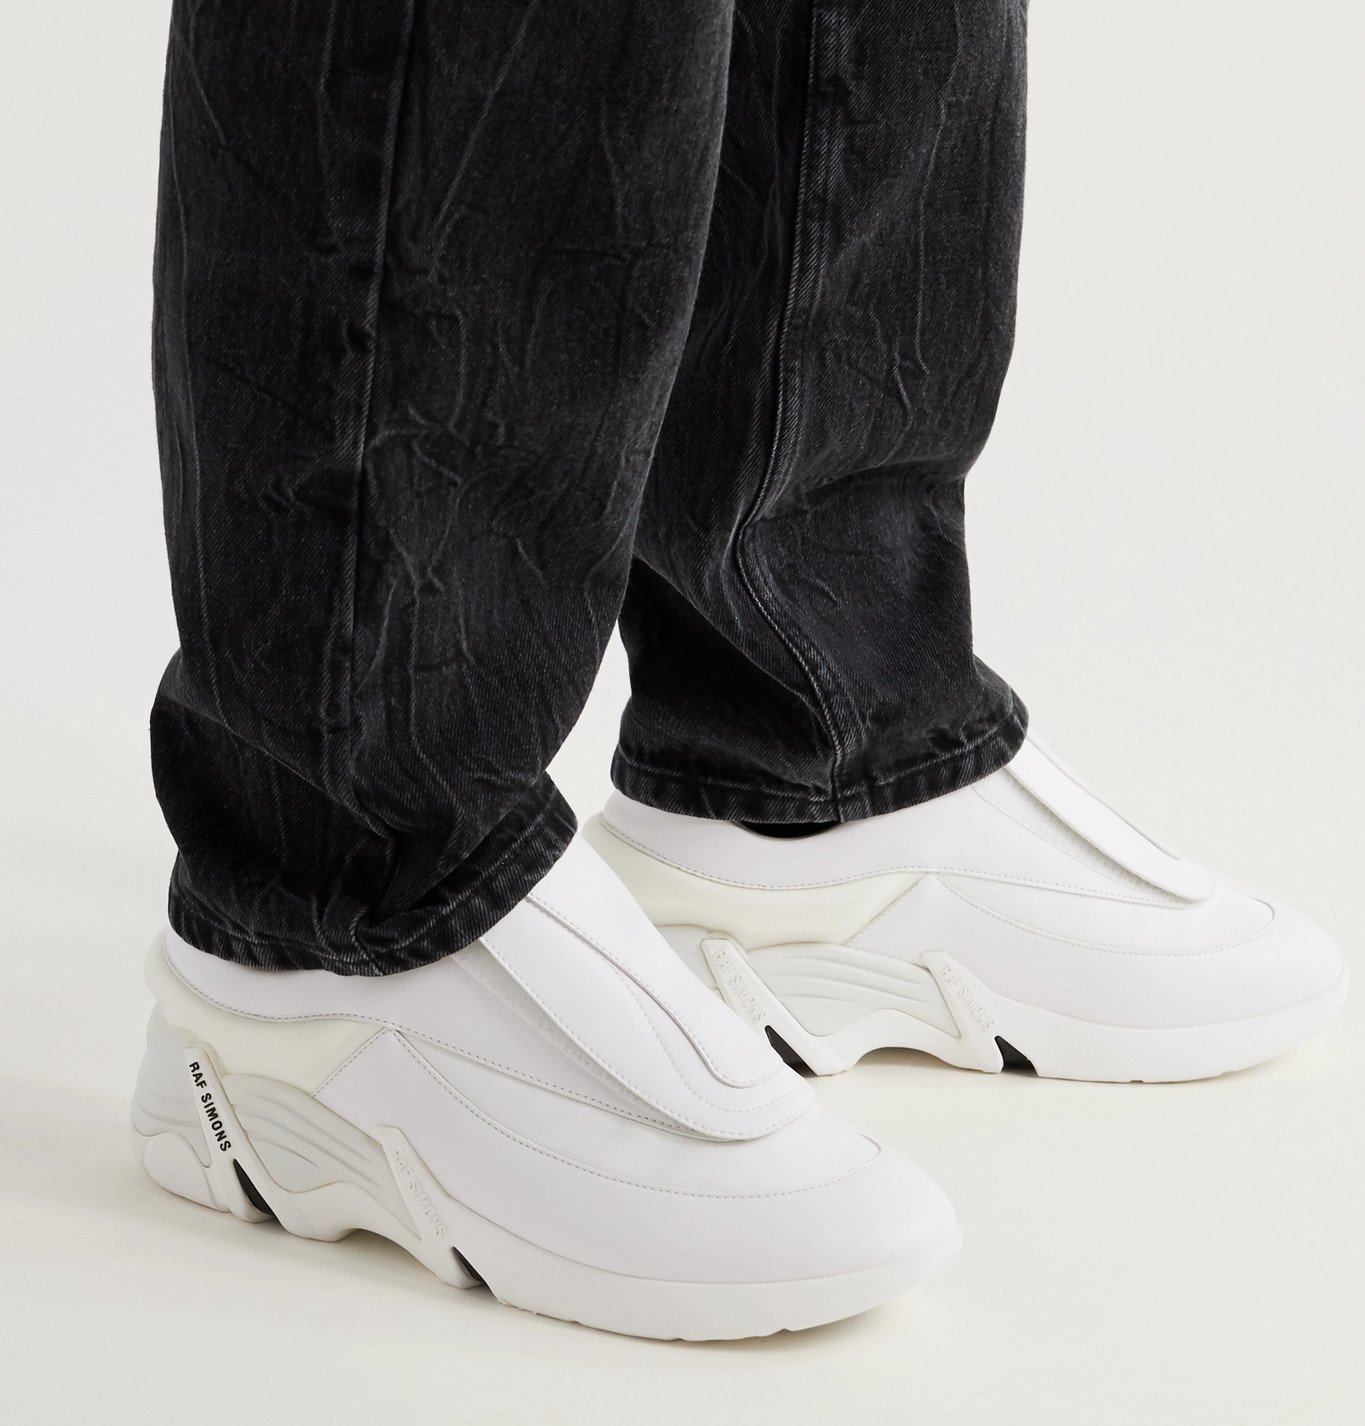 Raf Simons - Antei Rubber-Trimmed Leather Sneakers - White Raf Simons